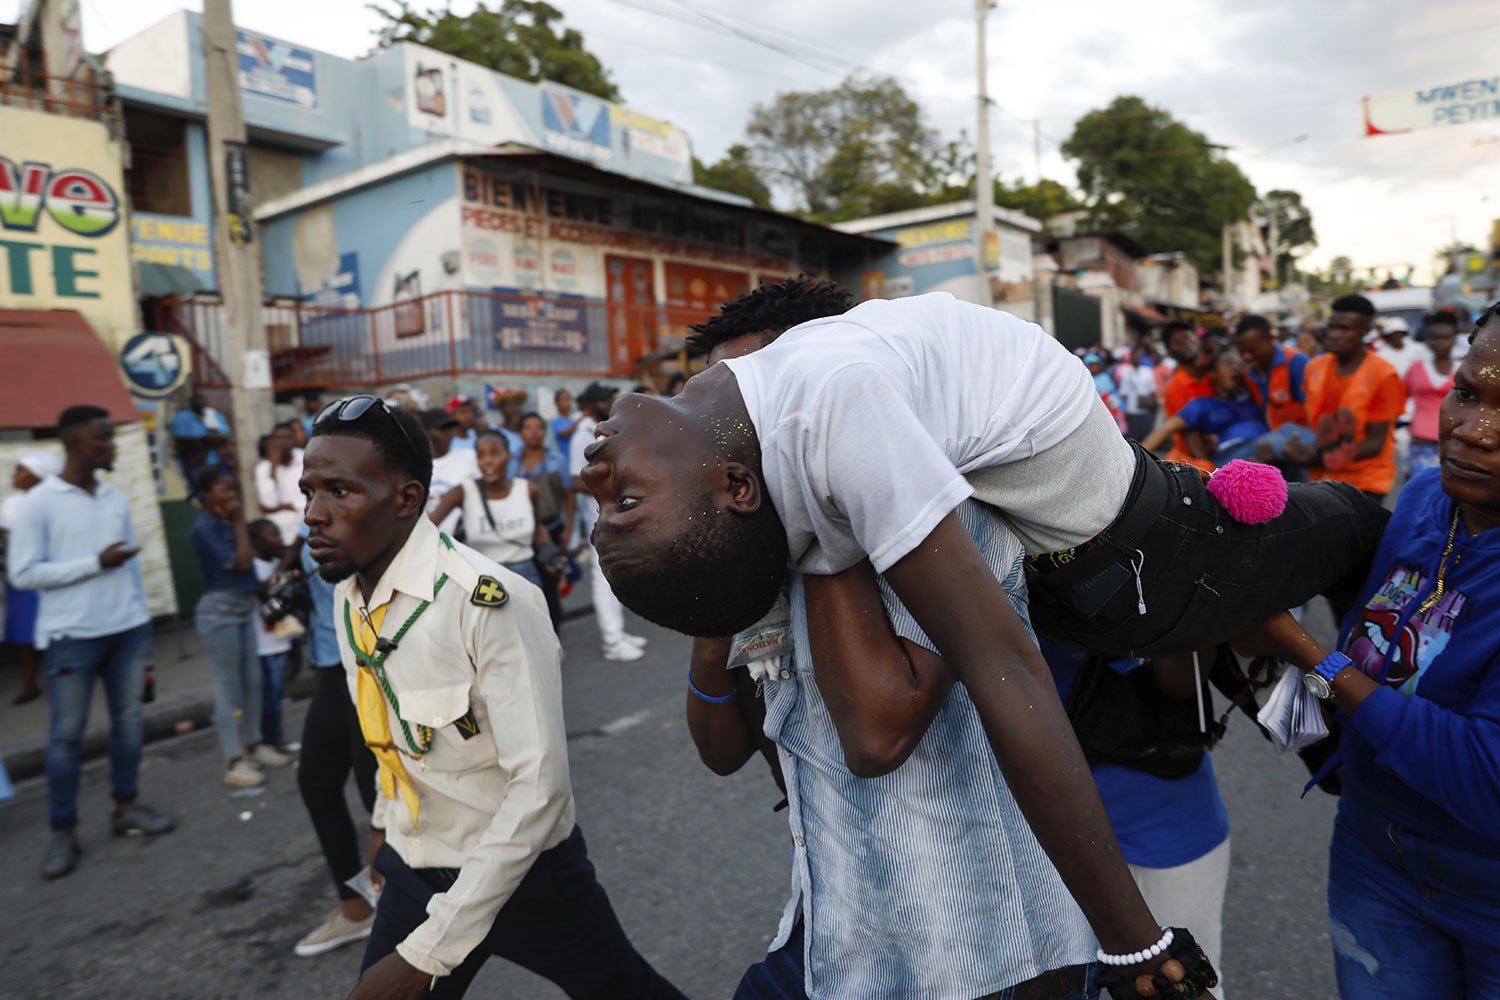  A person who fainted during a procession for Catholic feast of the Immaculate Conception is carried away in Port-au-Prince, Haiti, Dec. 8, 2023. (AP Photo/Odelyn Joseph) 